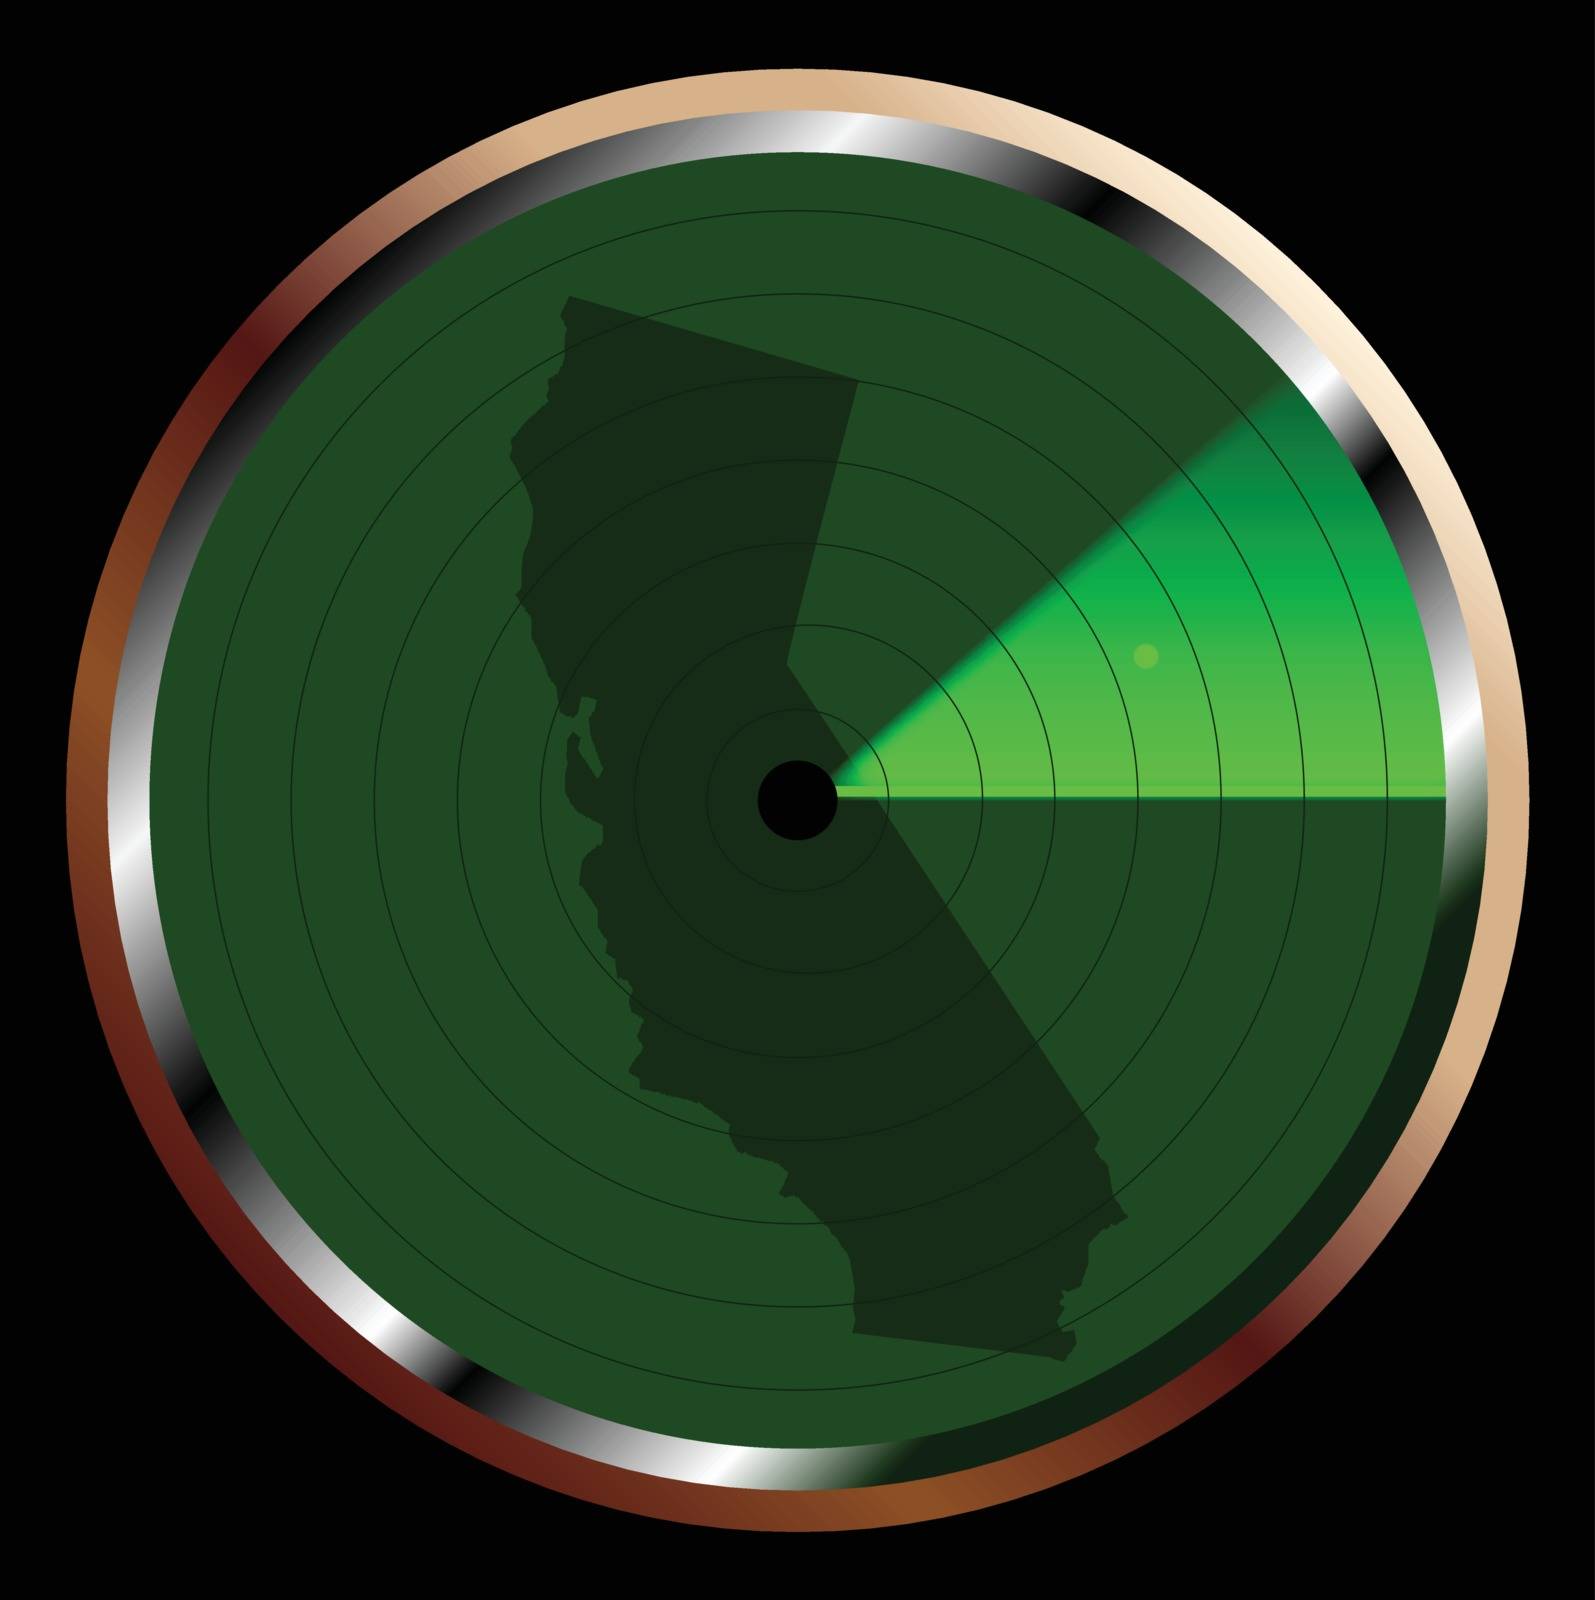 The screen of a typical radar device in green sweeping over California